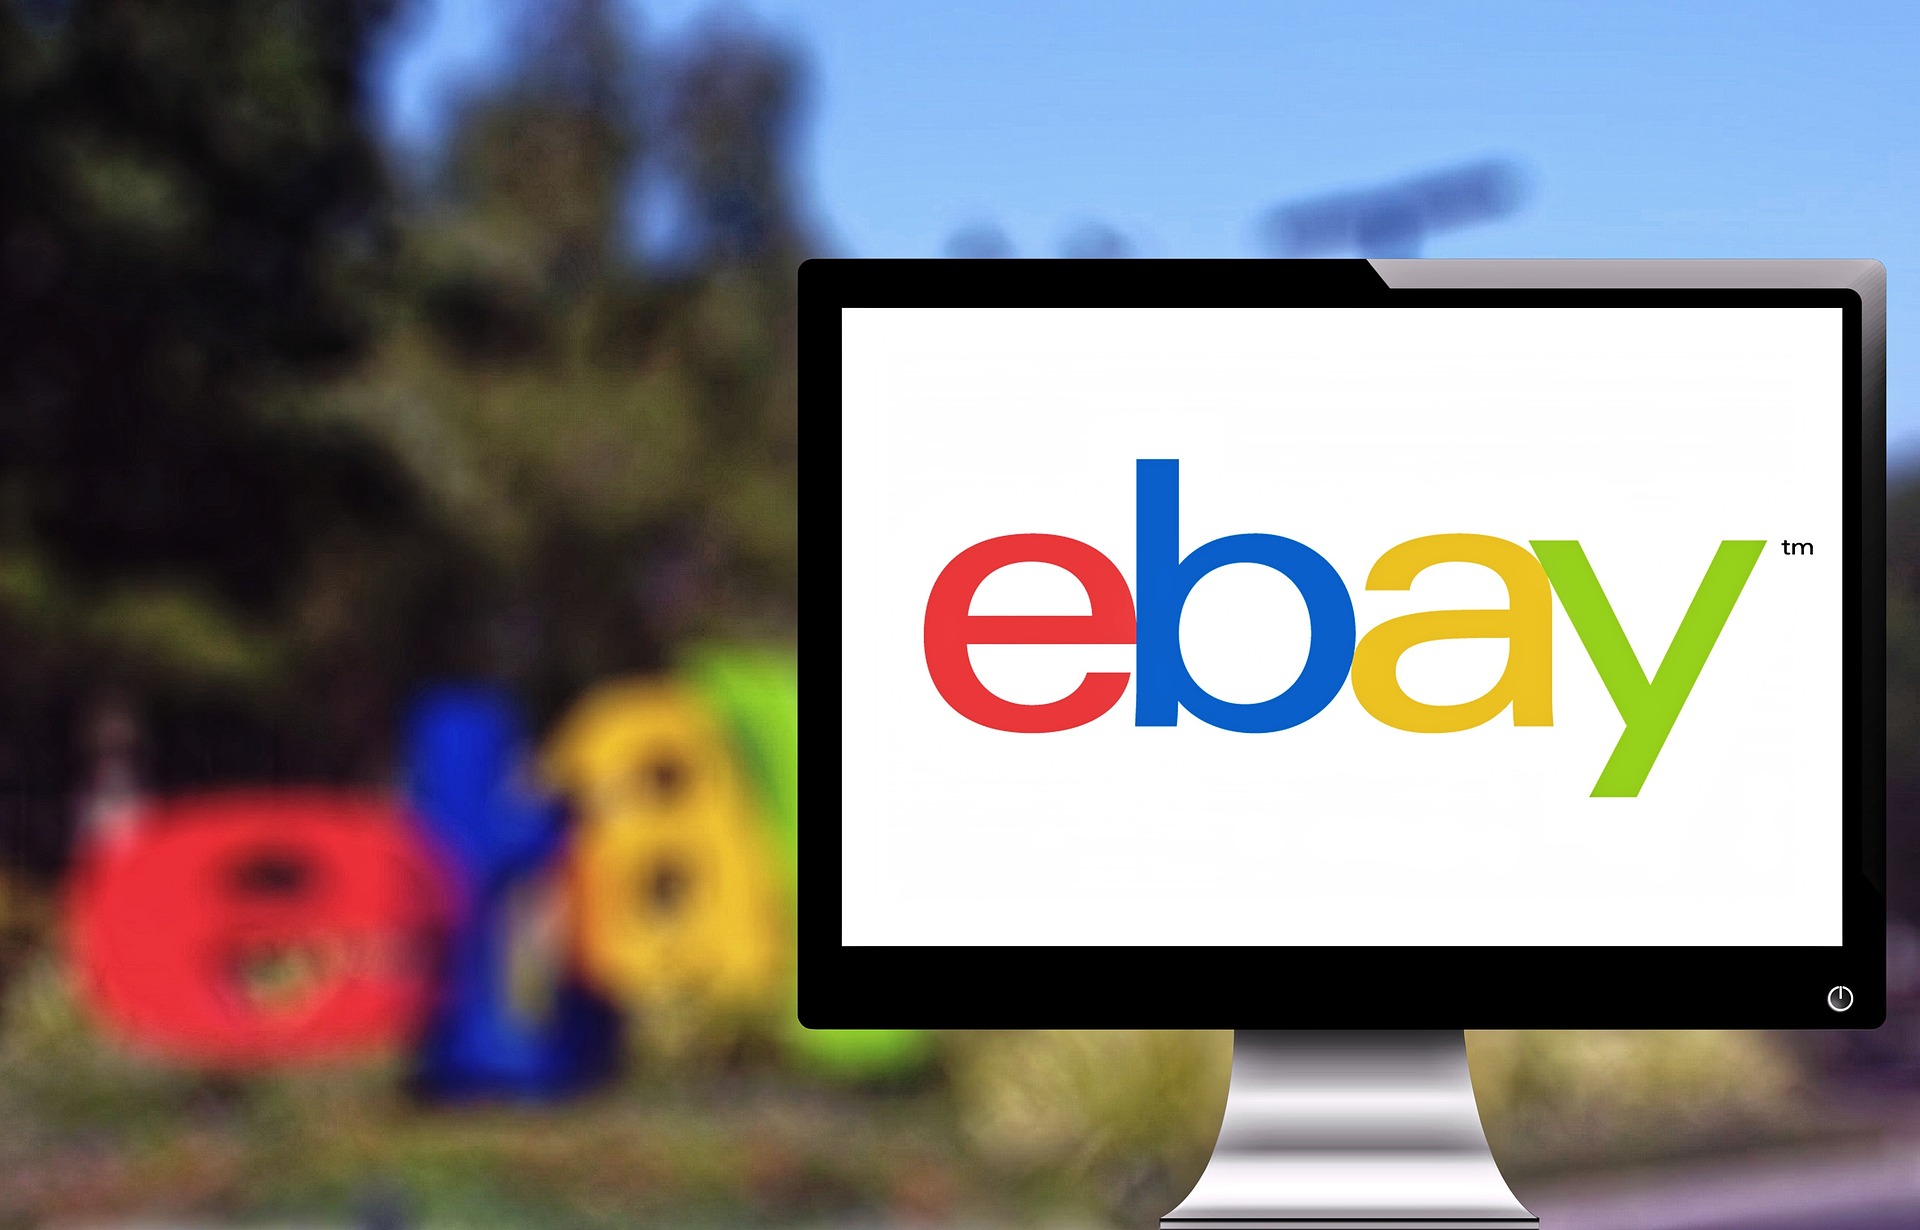 Automated Tailored EBAY Spam Campaign Leads to Risky Sites